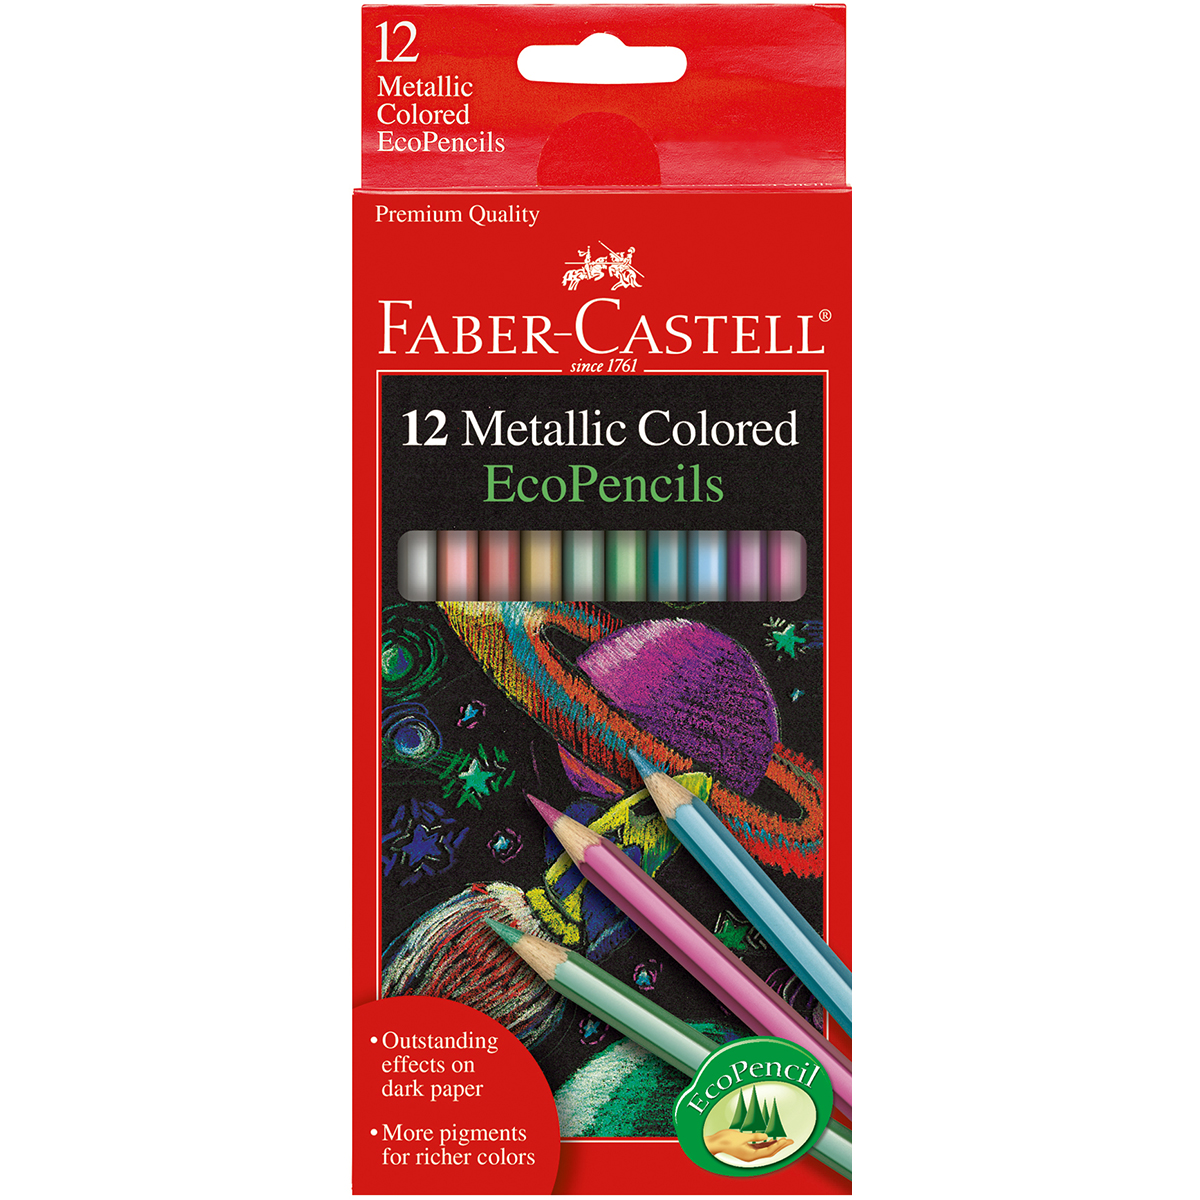 Faber-Castell Metallic Colored EcoPencils - 12 Count, Child, Beginner Art Supplies - image 1 of 7